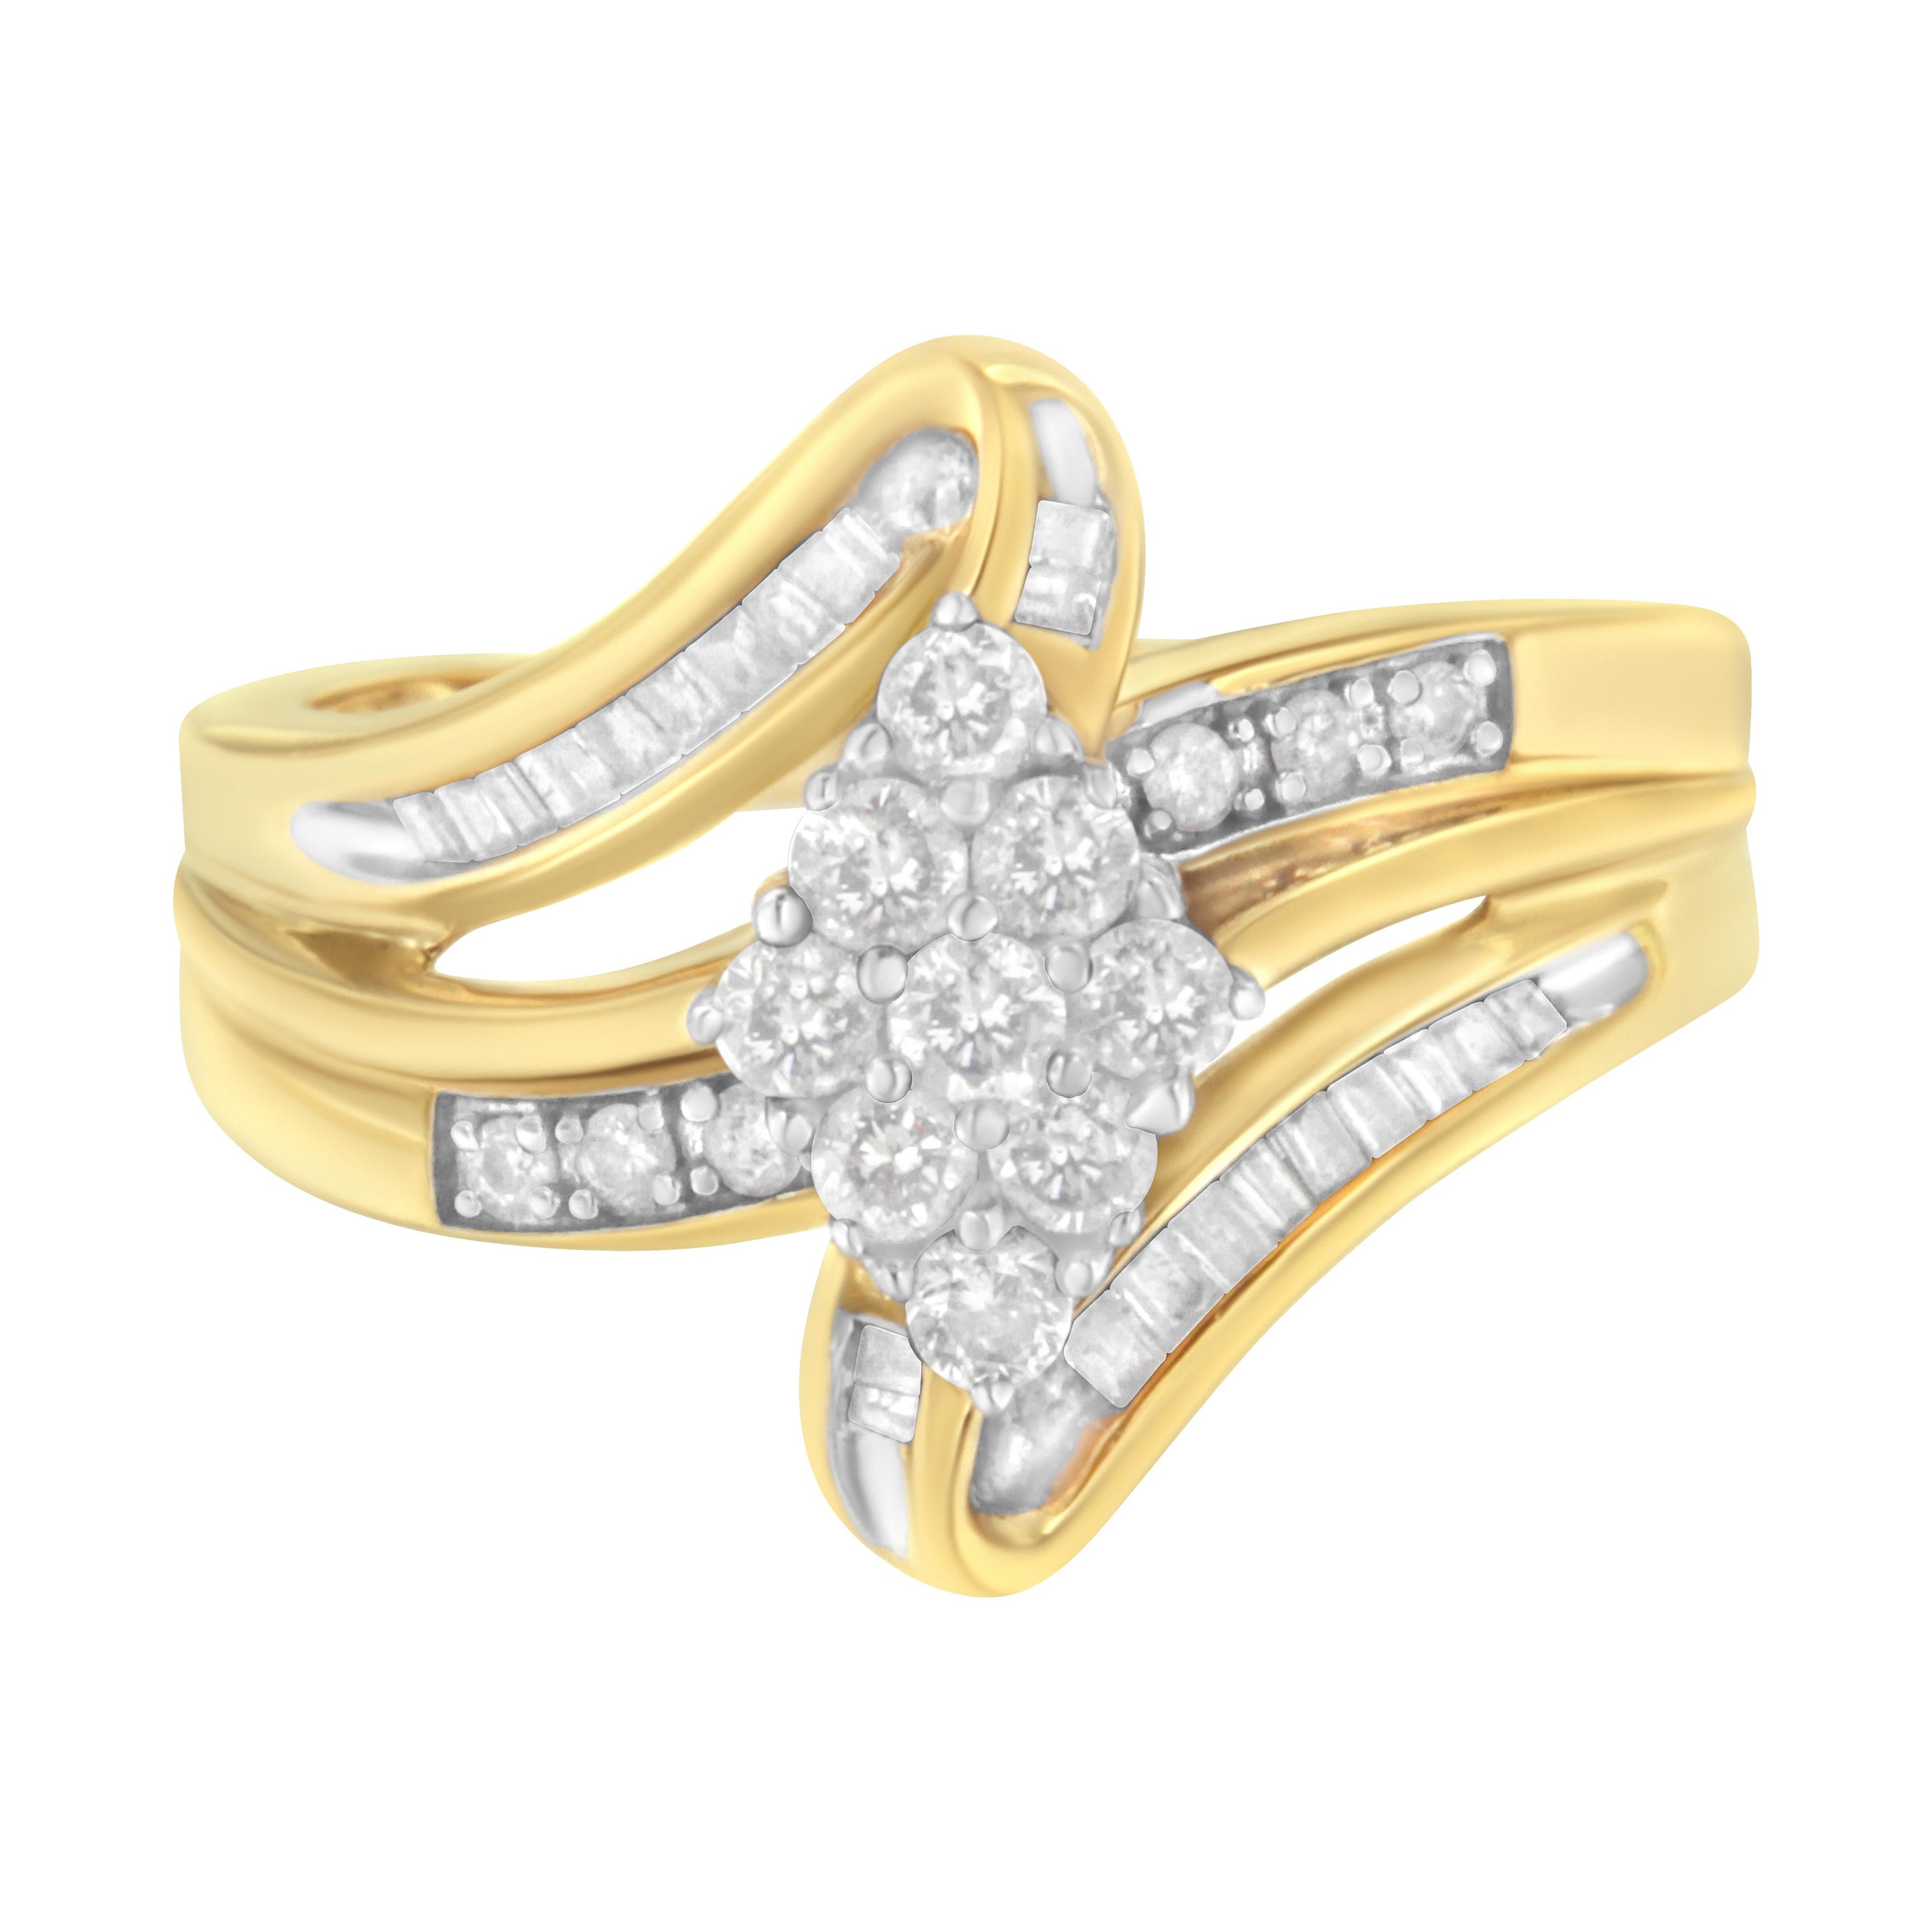 10K Yellow Gold 1/2 cttw Diamond Cluster Cocktail Ring For Sale